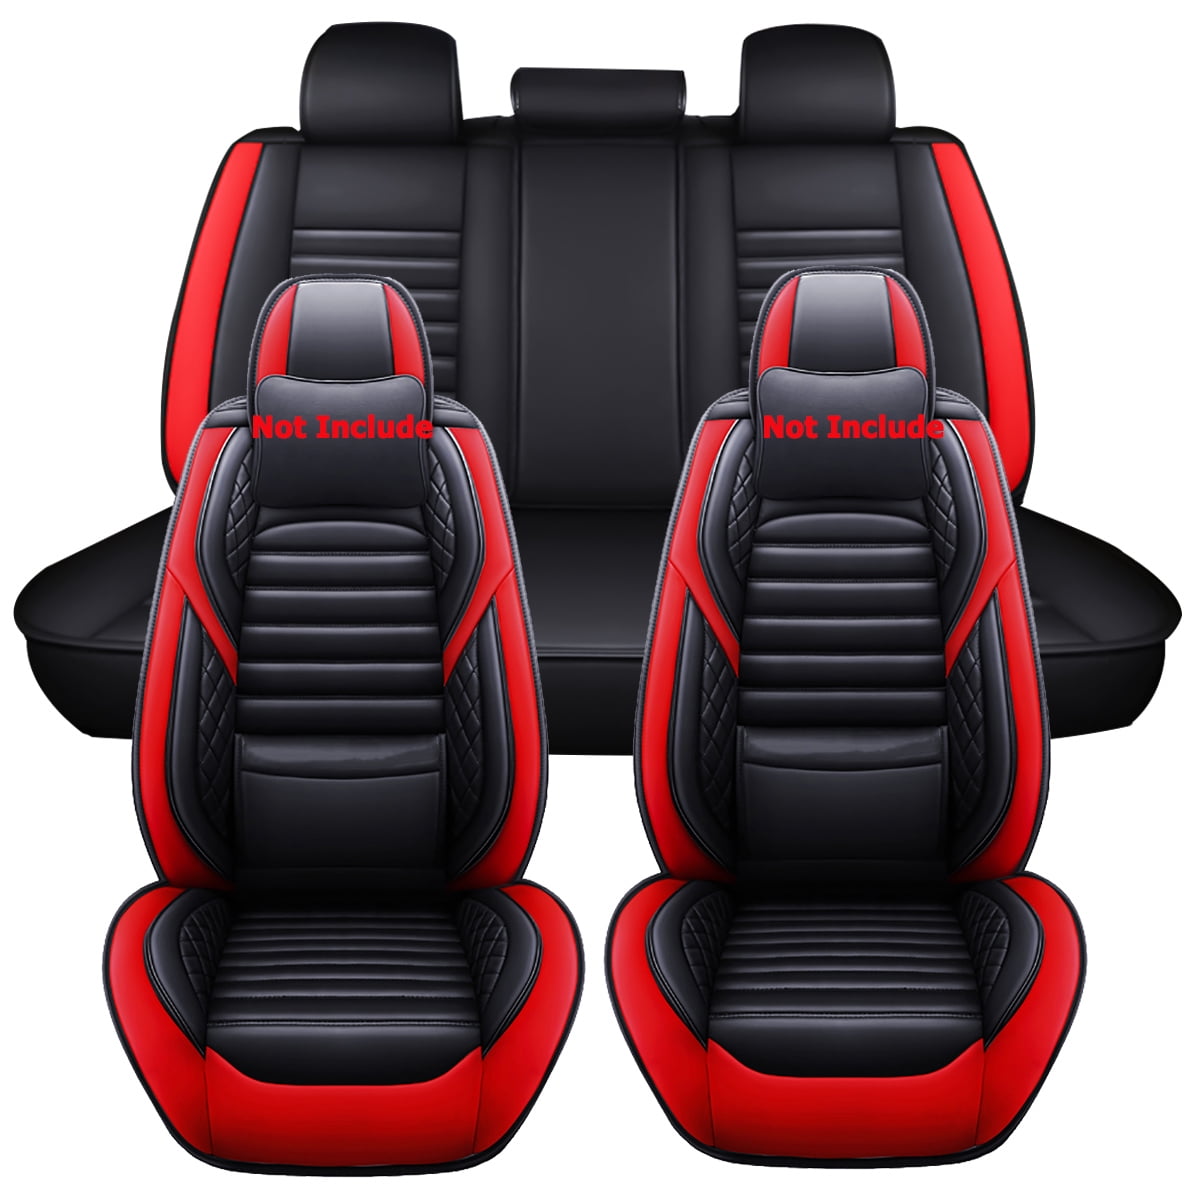 2x ELUTO Car Front Seat Covers PU Leather For Chevrolet Silverado 